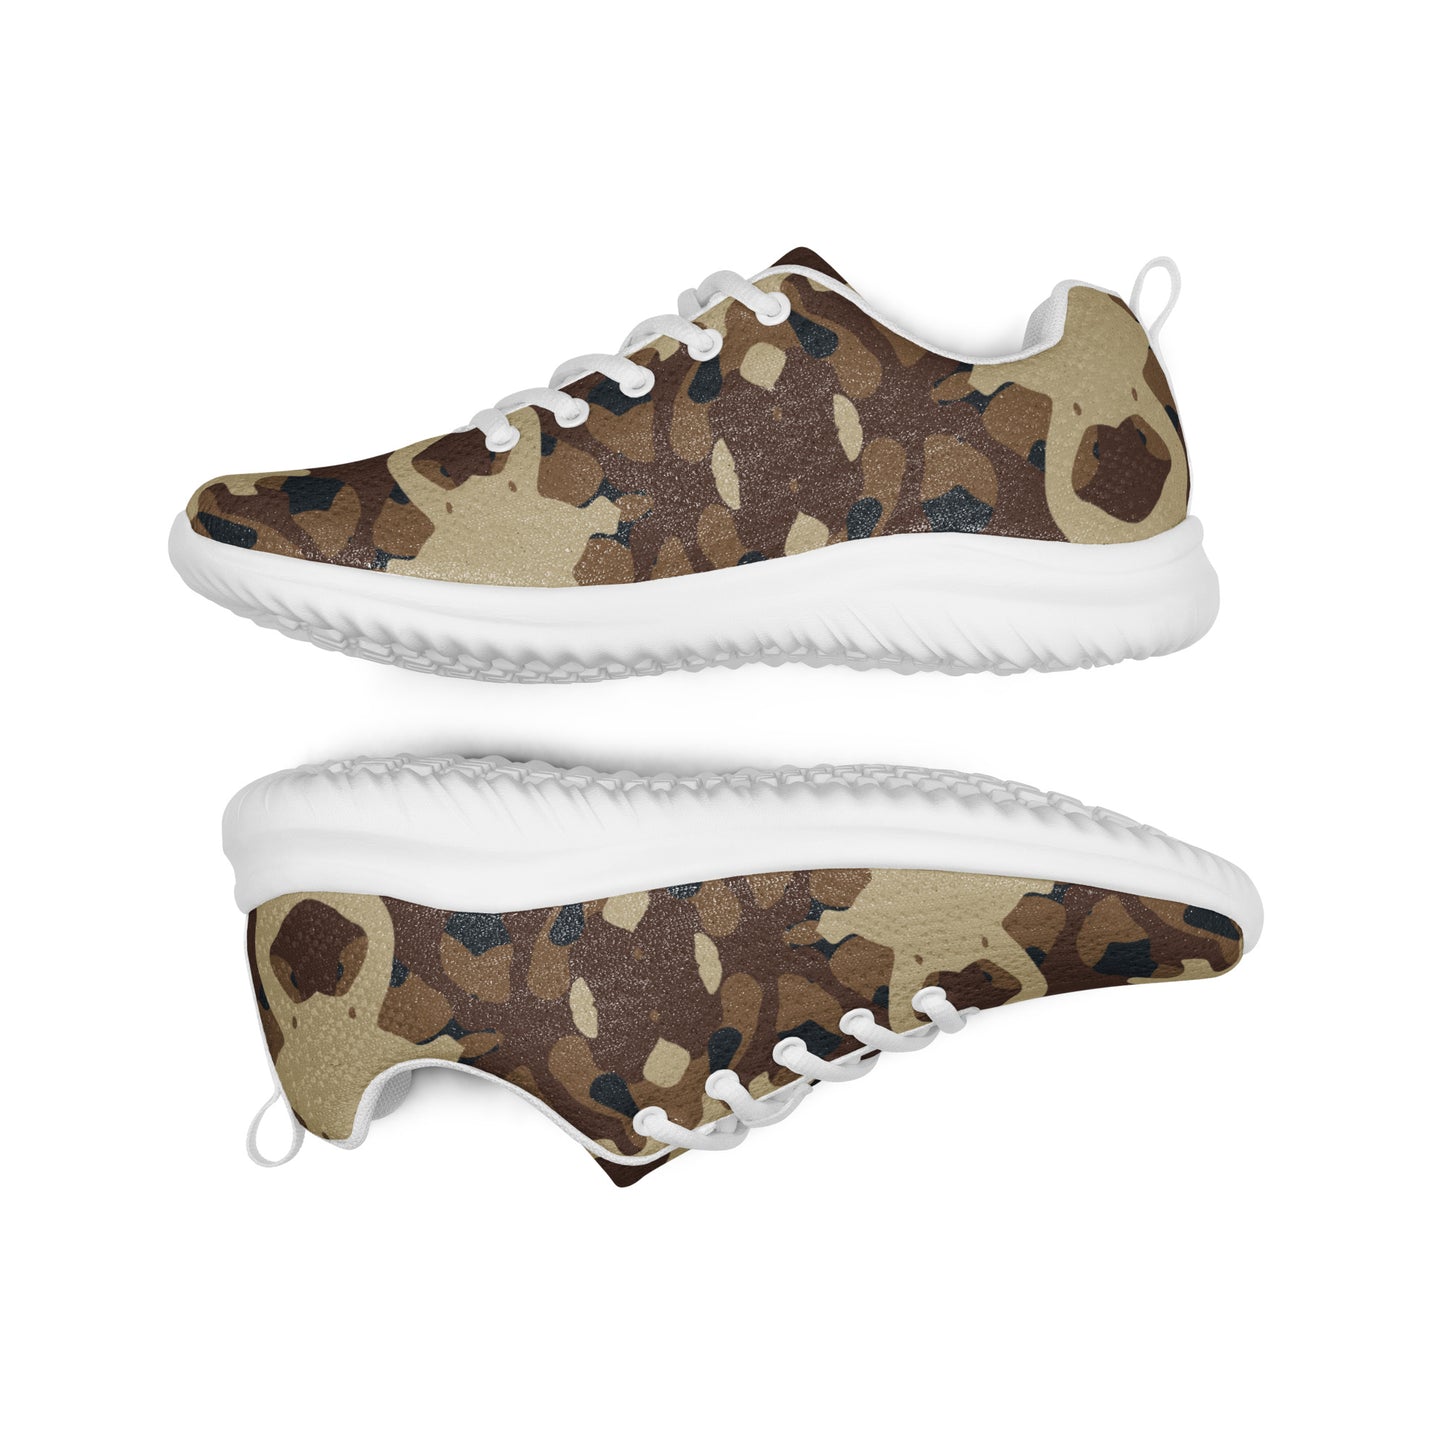 DASH Camouflage Land Men’s Athletic Shoes Lightweight Breathable Design by IOBI Original Apparel